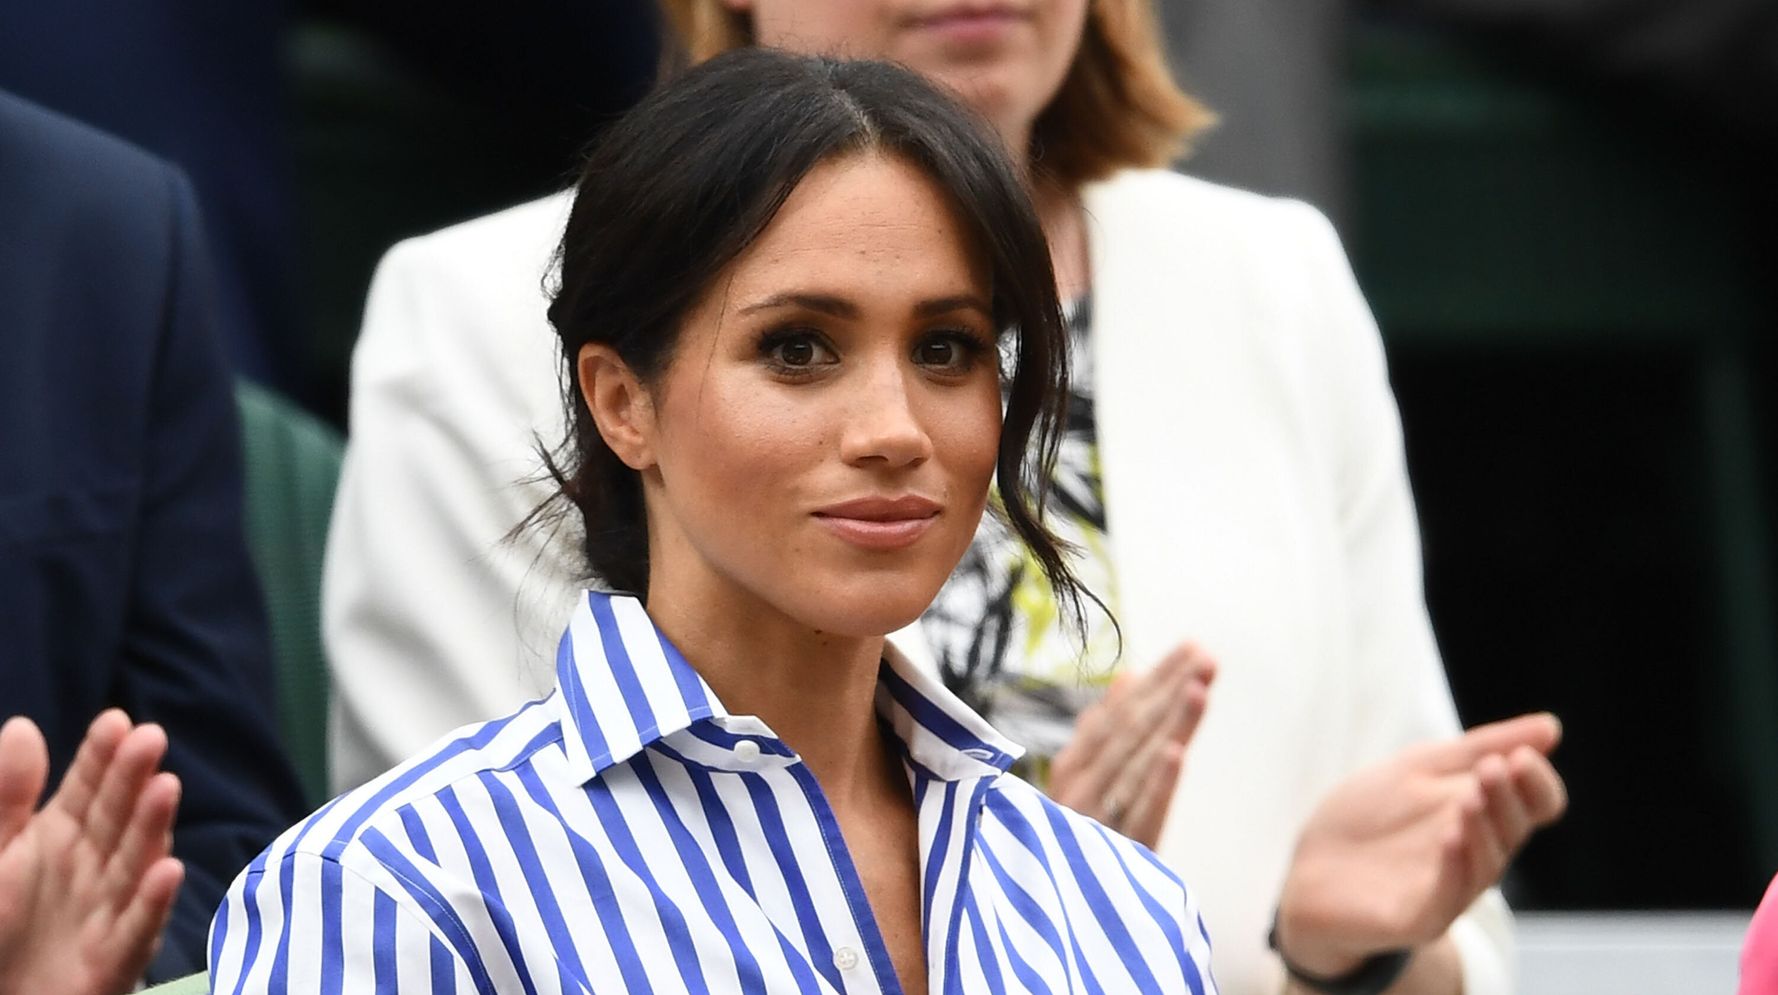 Meghan Markle responds by reporting that she intimidated royal helpers